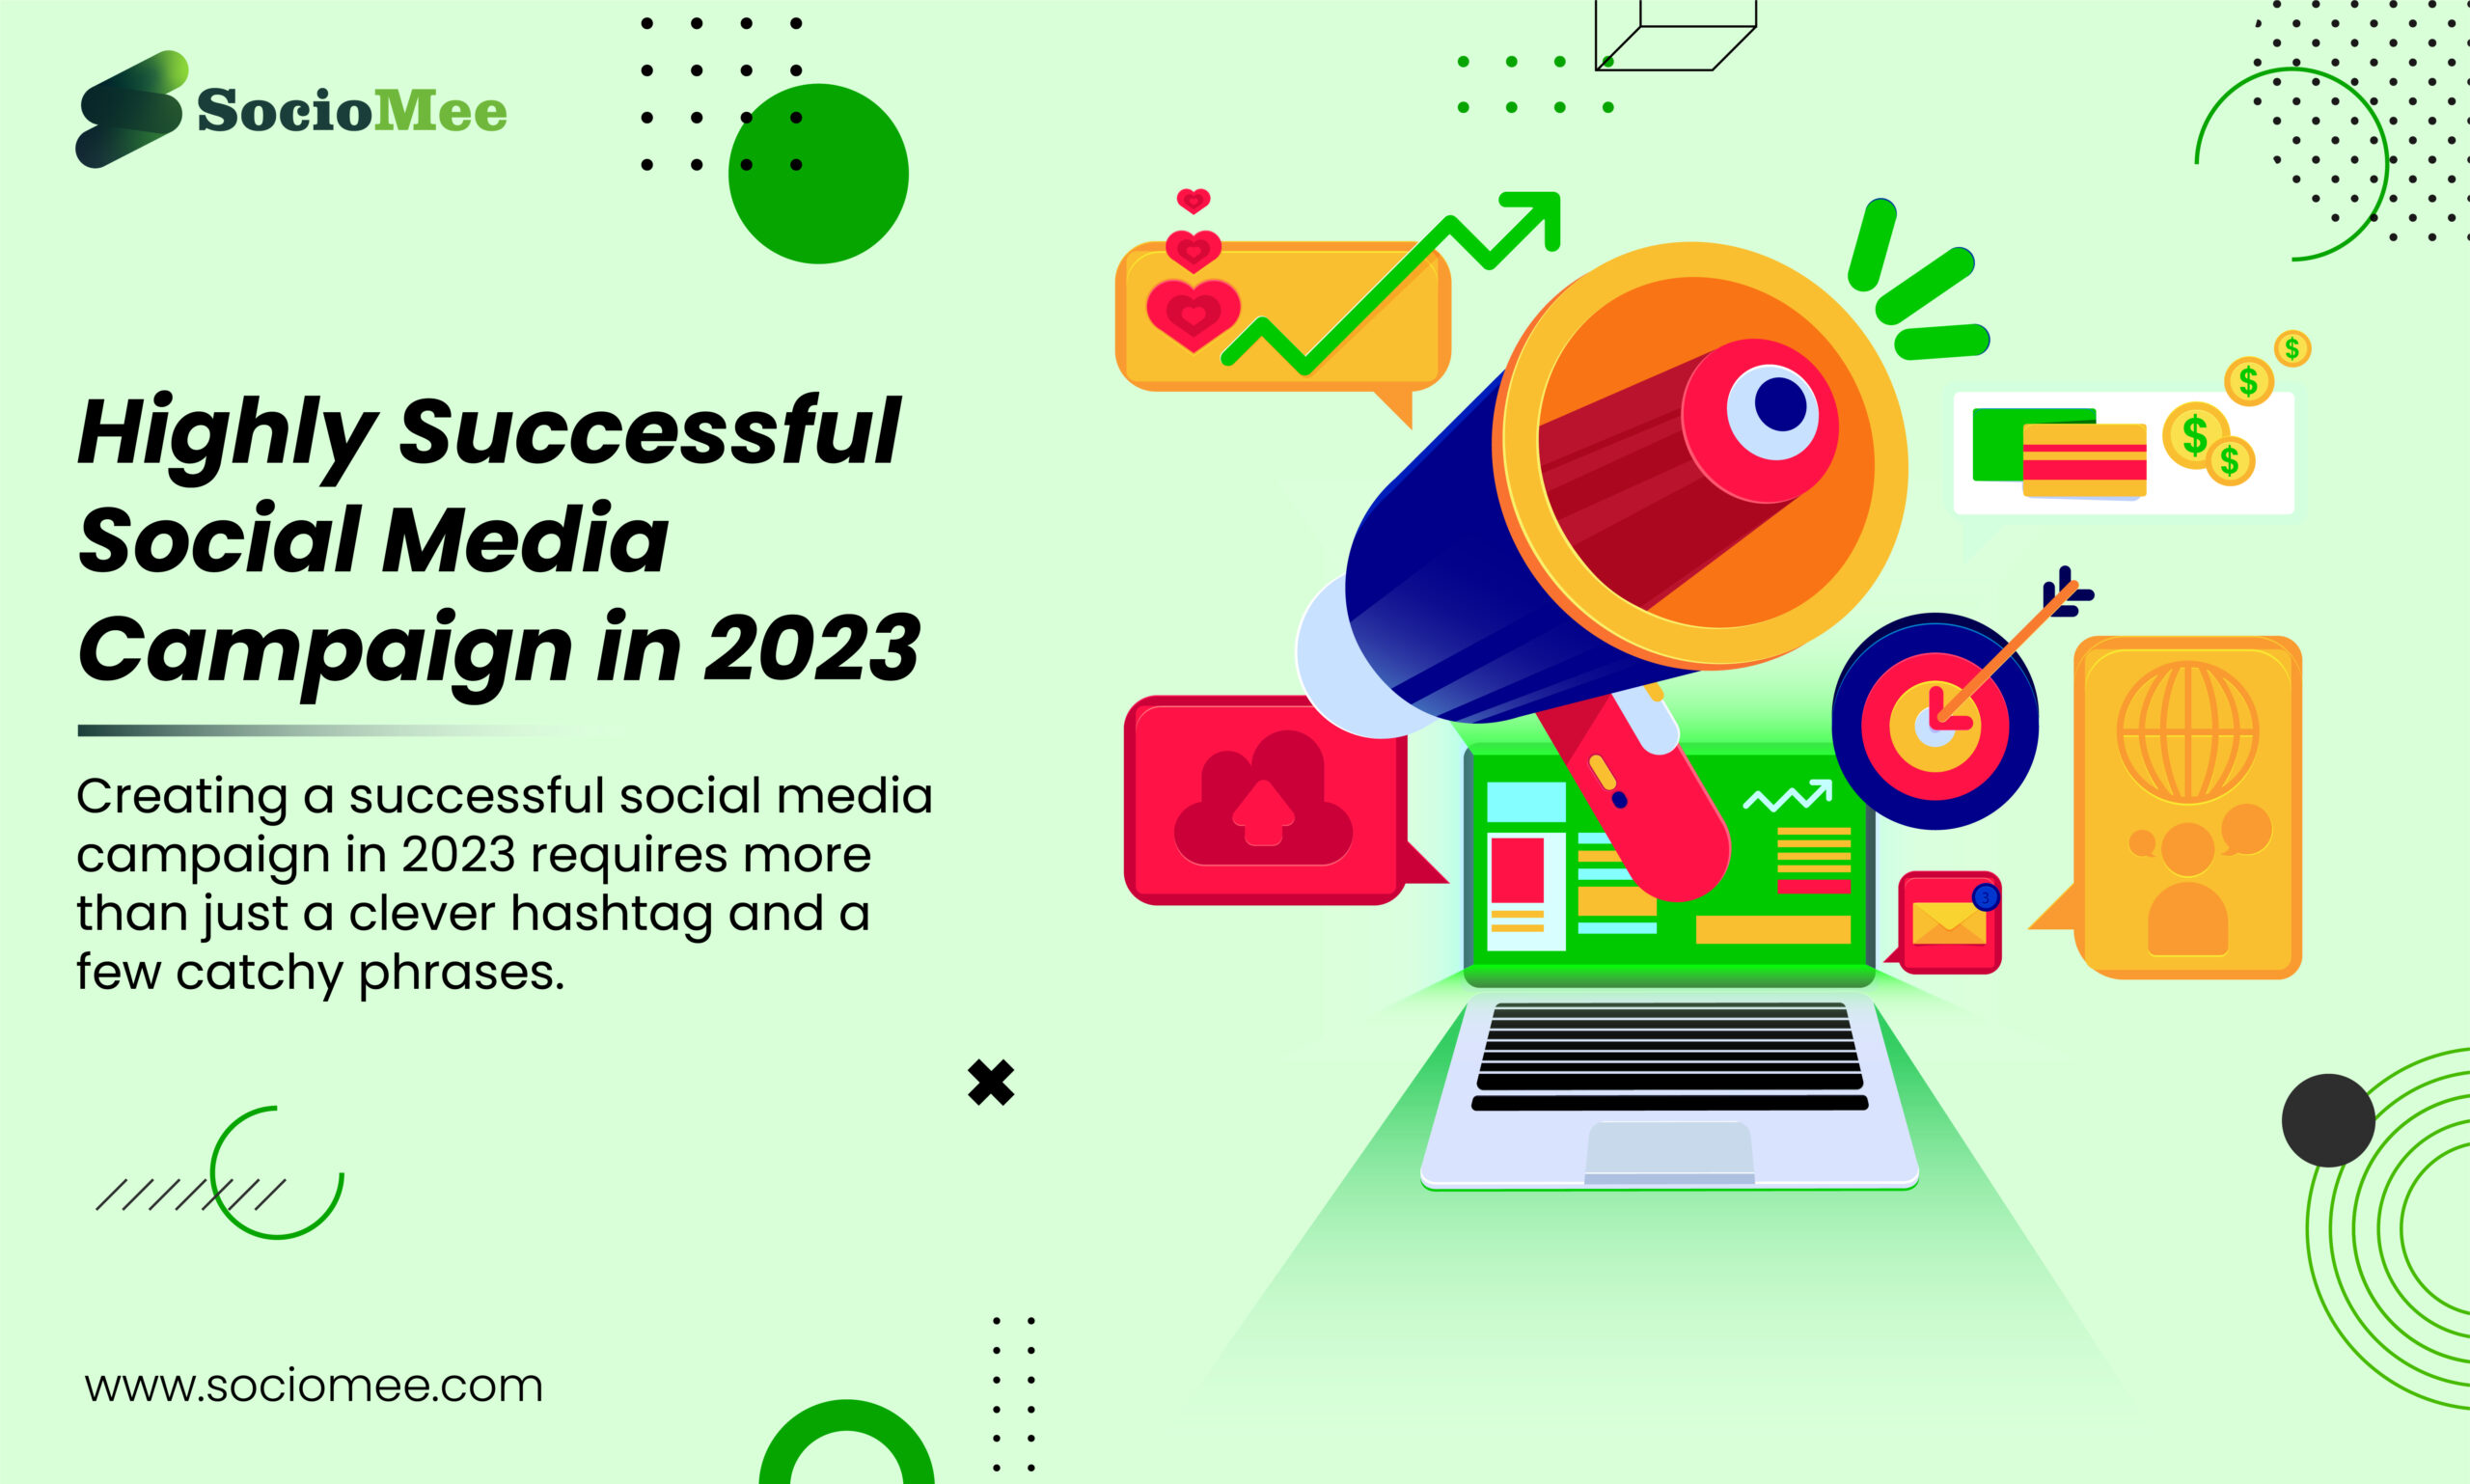 How to Design a Highly Successful Social Media Campaign in 2023